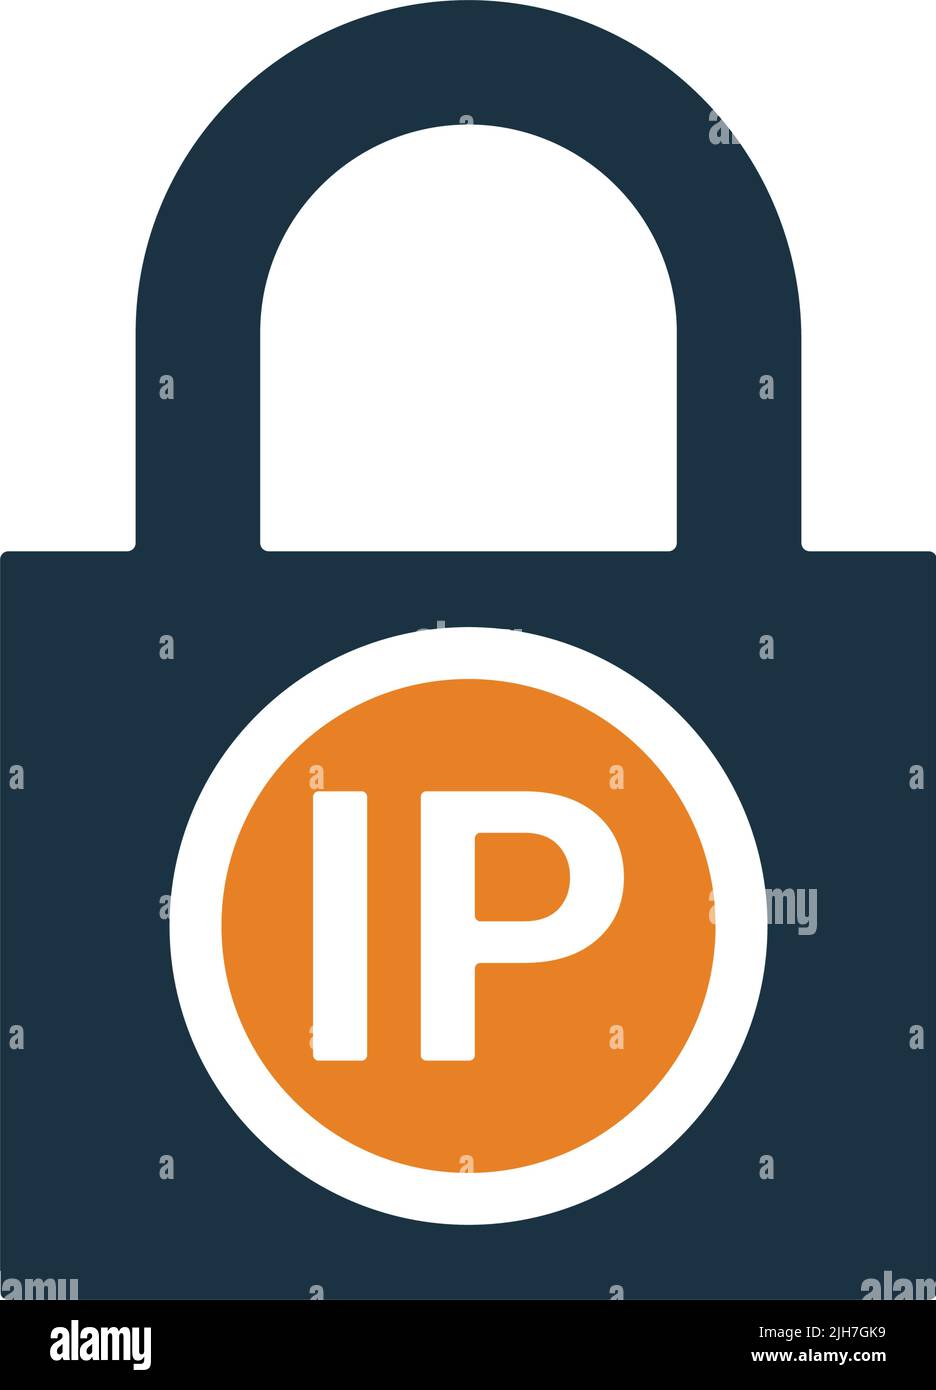 Ip, lockout, ban icon is isolated on white background. Use for graphic and web design or commercial purposes. Vector EPS file. Stock Vector